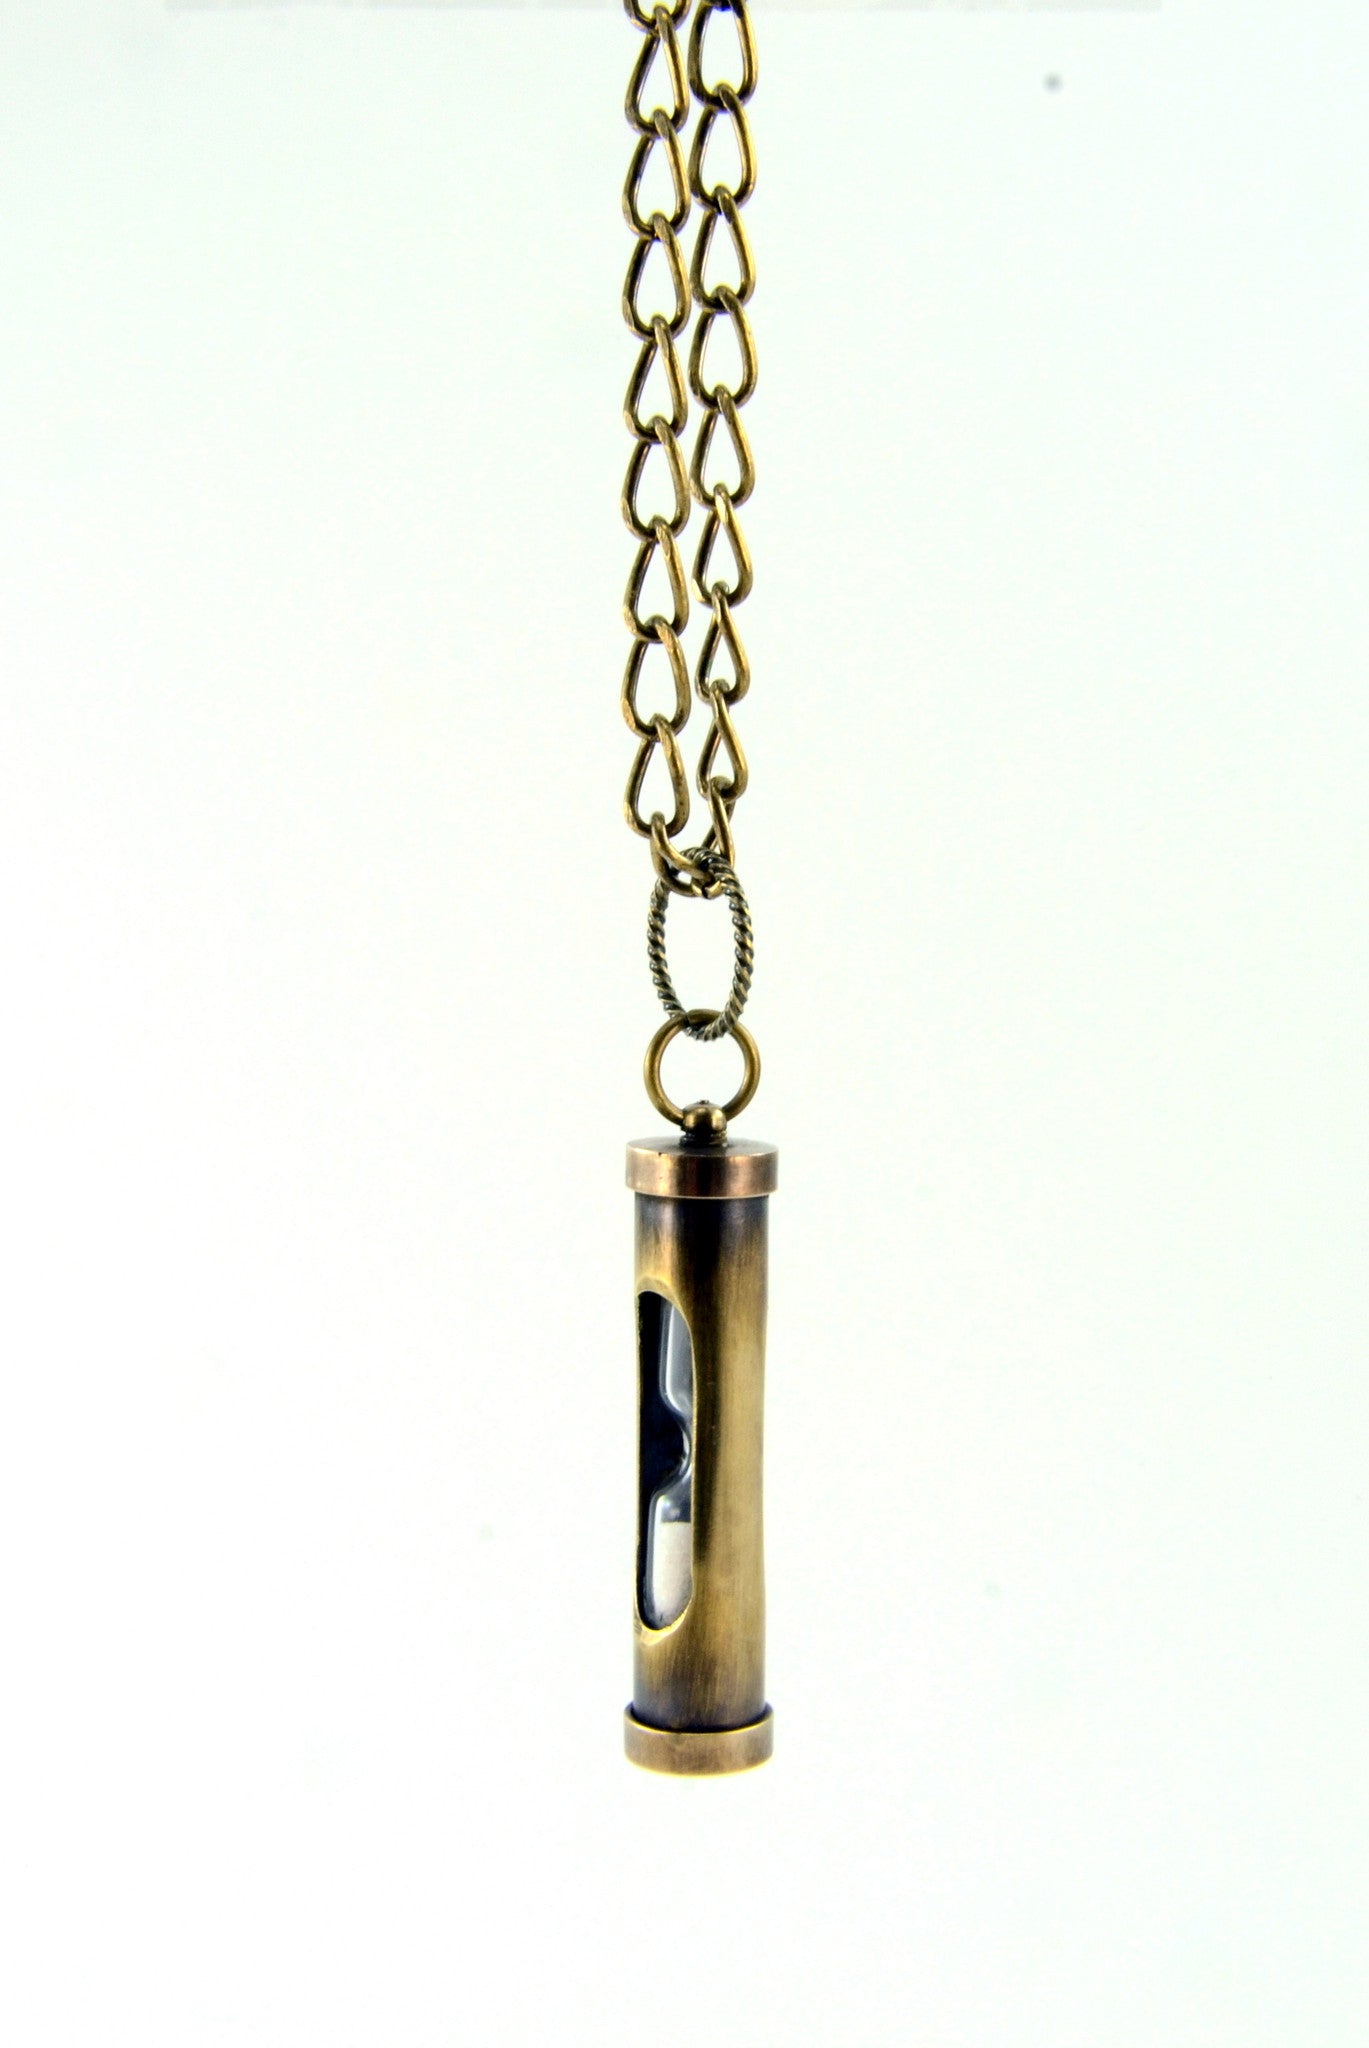 Hour Glass Sand Timer Pendant Necklace - Gwen Delicious Jewelry Designs